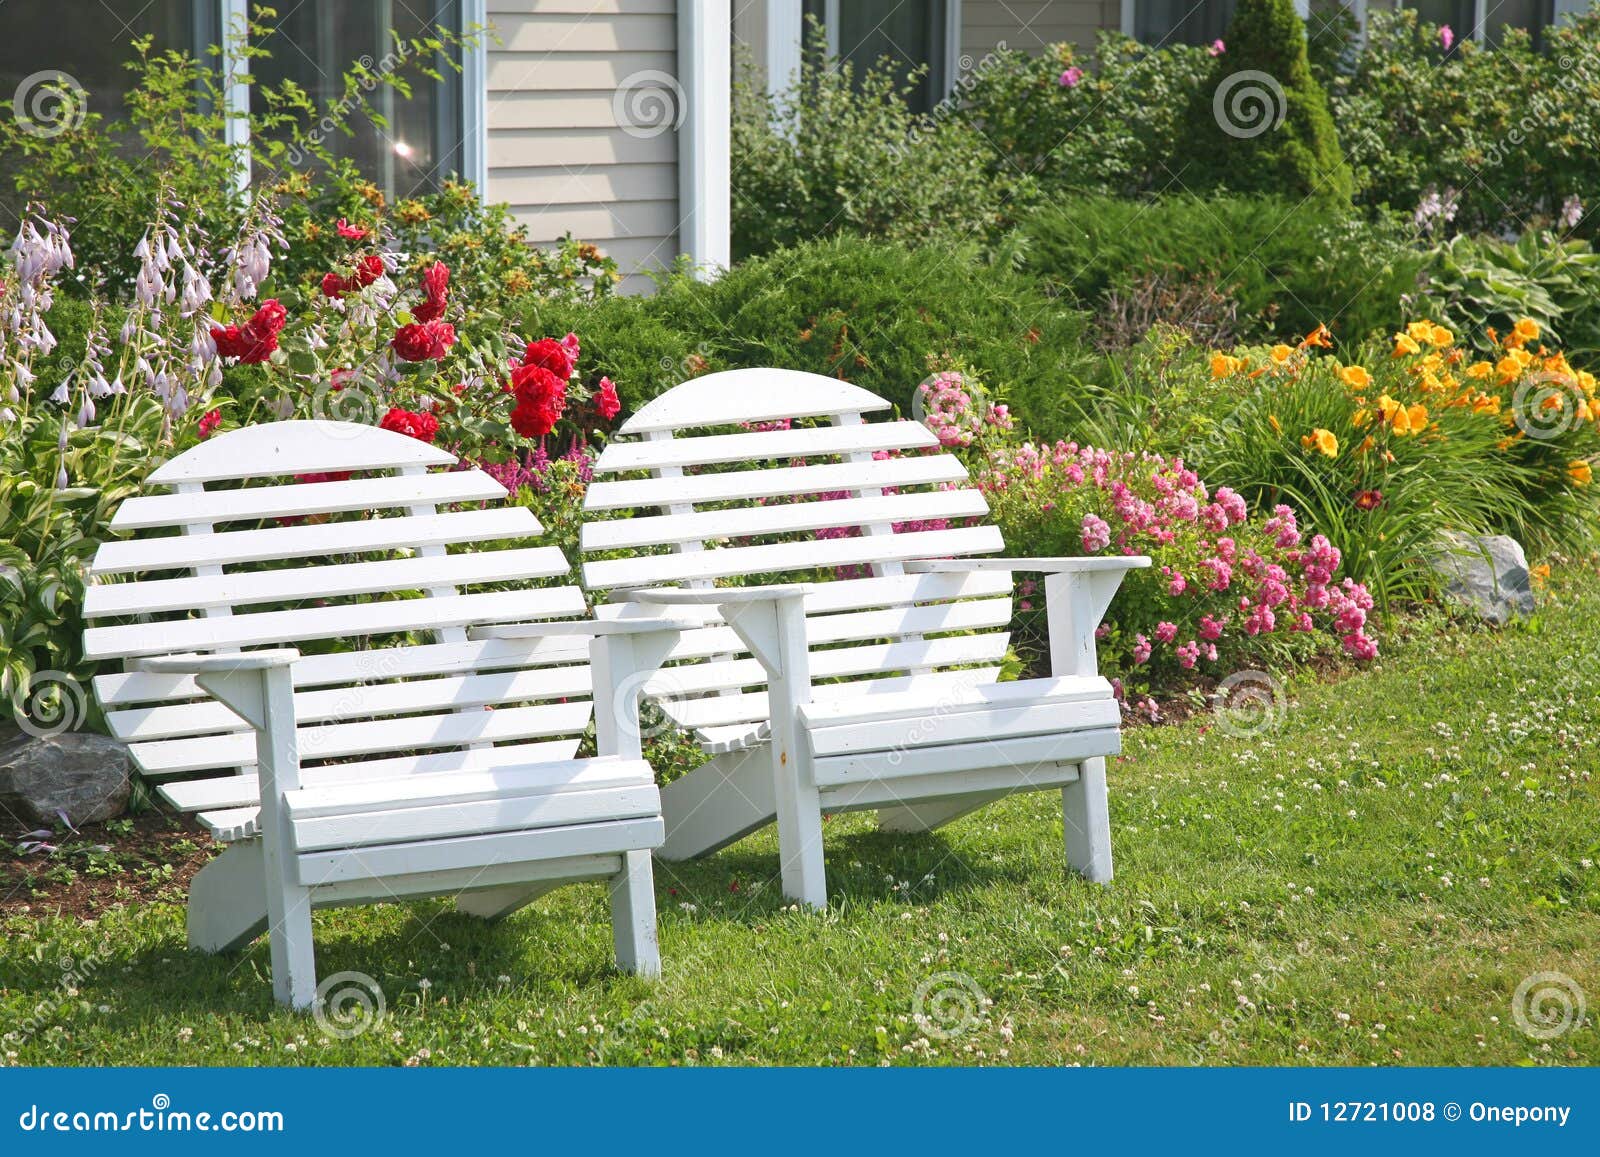 Garden Moon Chairs stock photo. Image of residential - 12721008